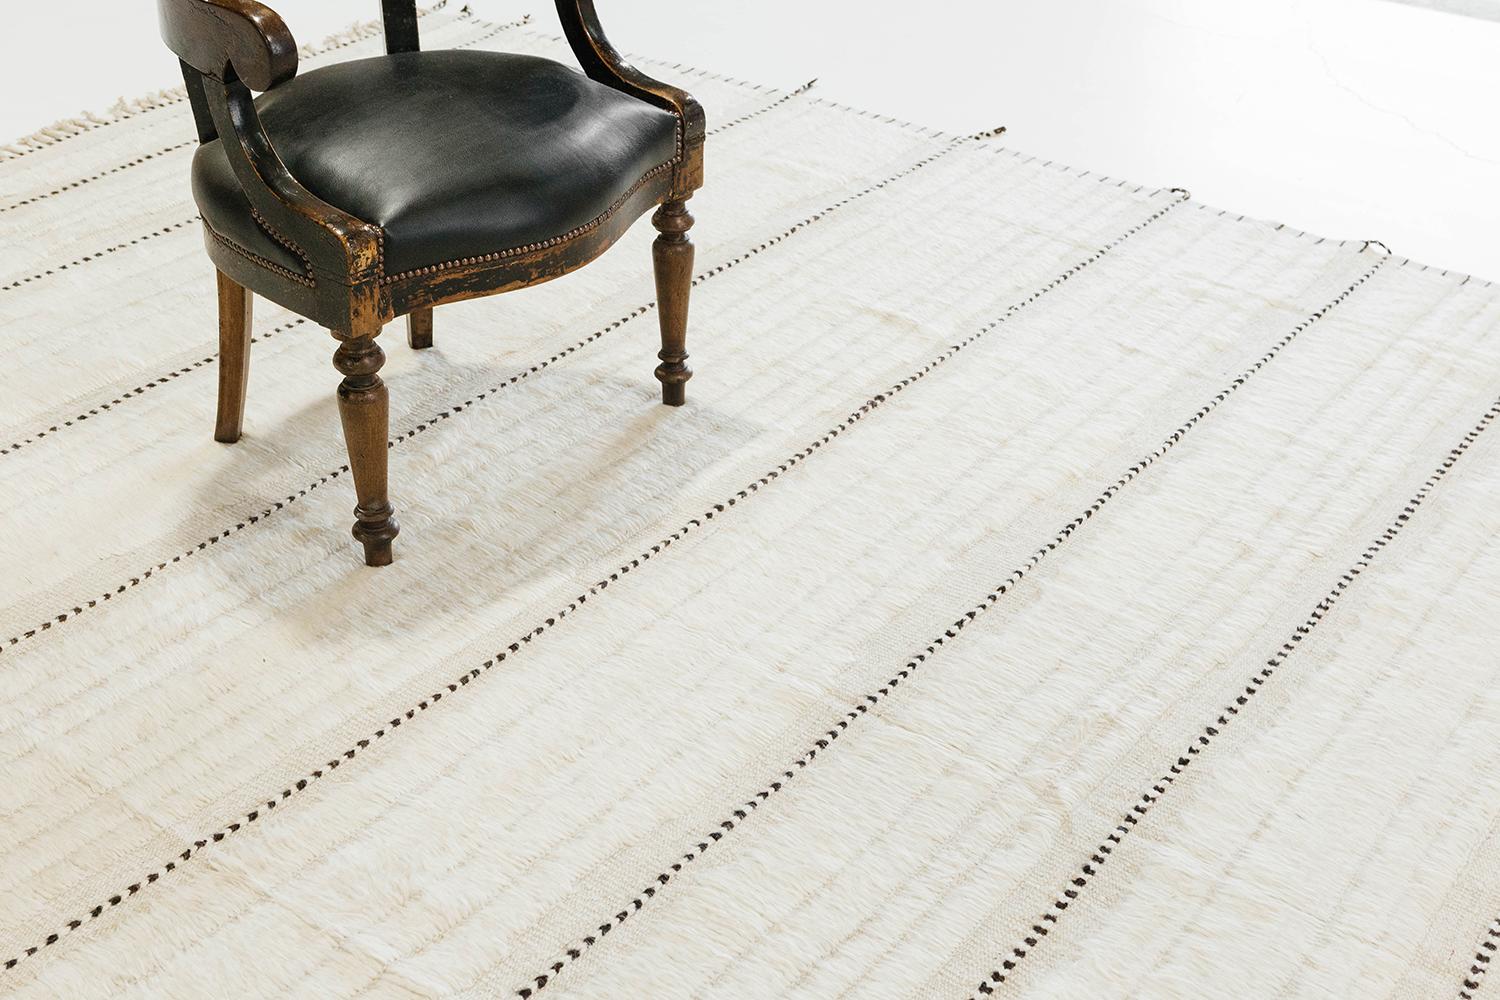 Kit Moresby' has become an Los Angeles staple. The signature rug of Malibu. Hand woven of luxurious wool, with timeless design elements and color palette. This Mehraban design is a contemporary interpretation of an Azilal, a part of our Atlas